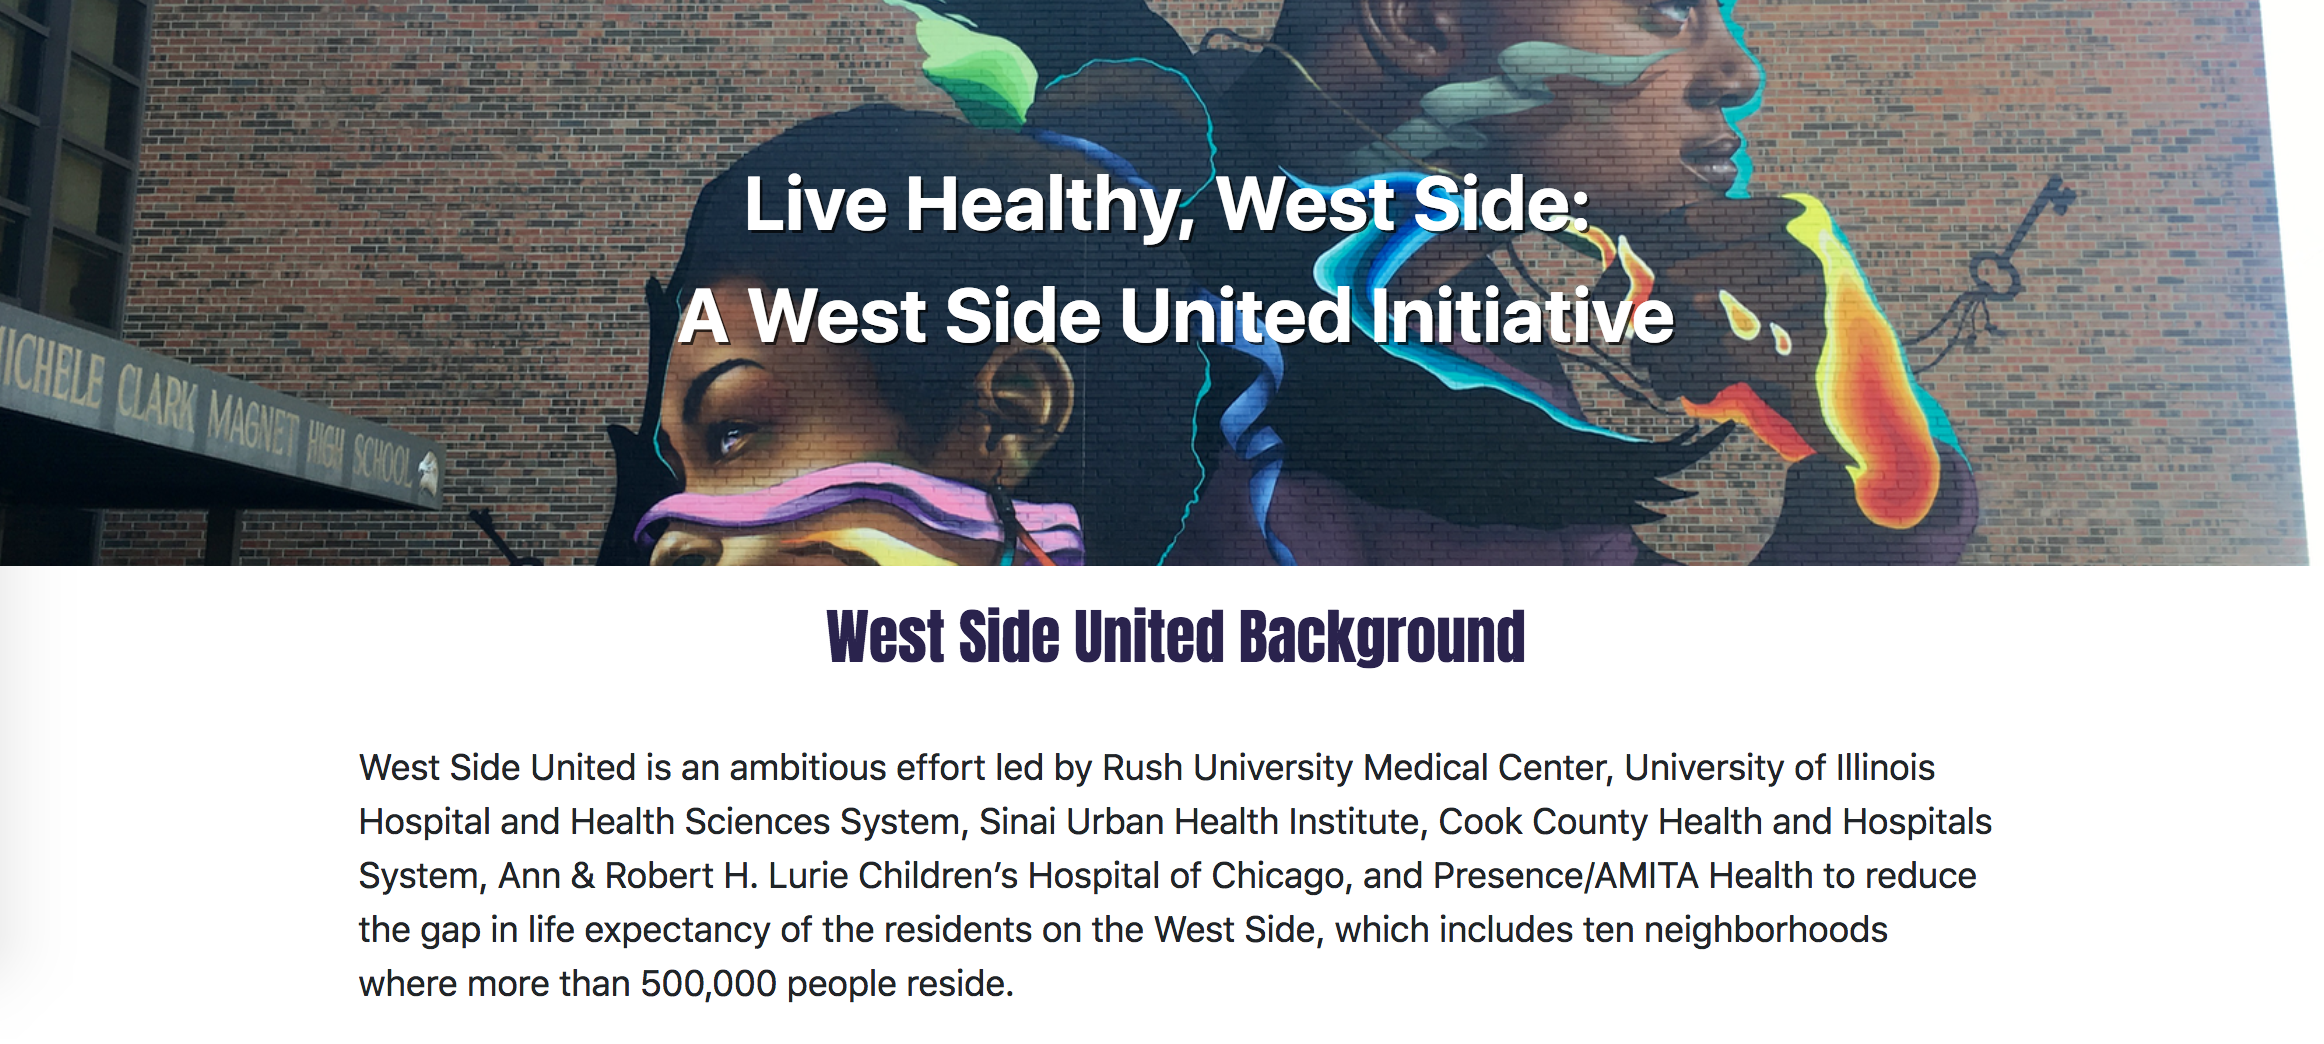 Building Live Healthy, West Side During the DataMade Mentorship